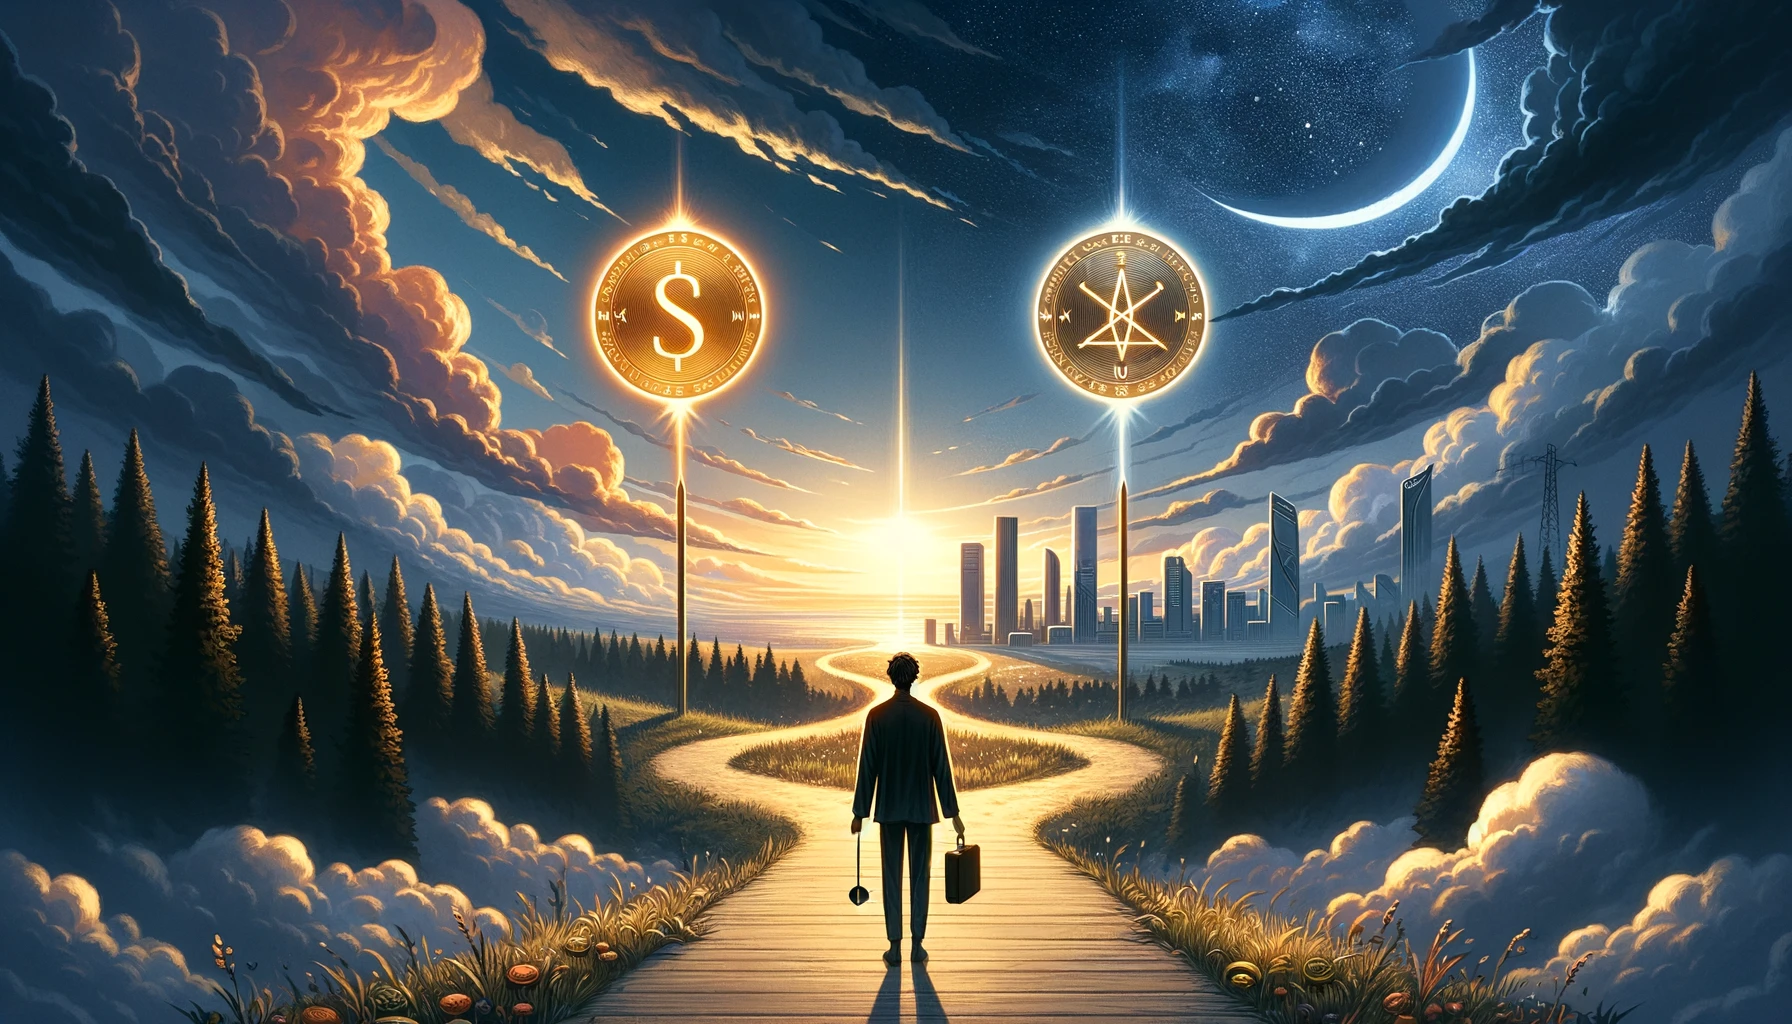 An illustration showing a figure at a crossroads holding two pentacles, symbolizing the balance between professional success and personal fulfillment. The image captures the complexity of human desires and the ongoing quest to find harmony between them.